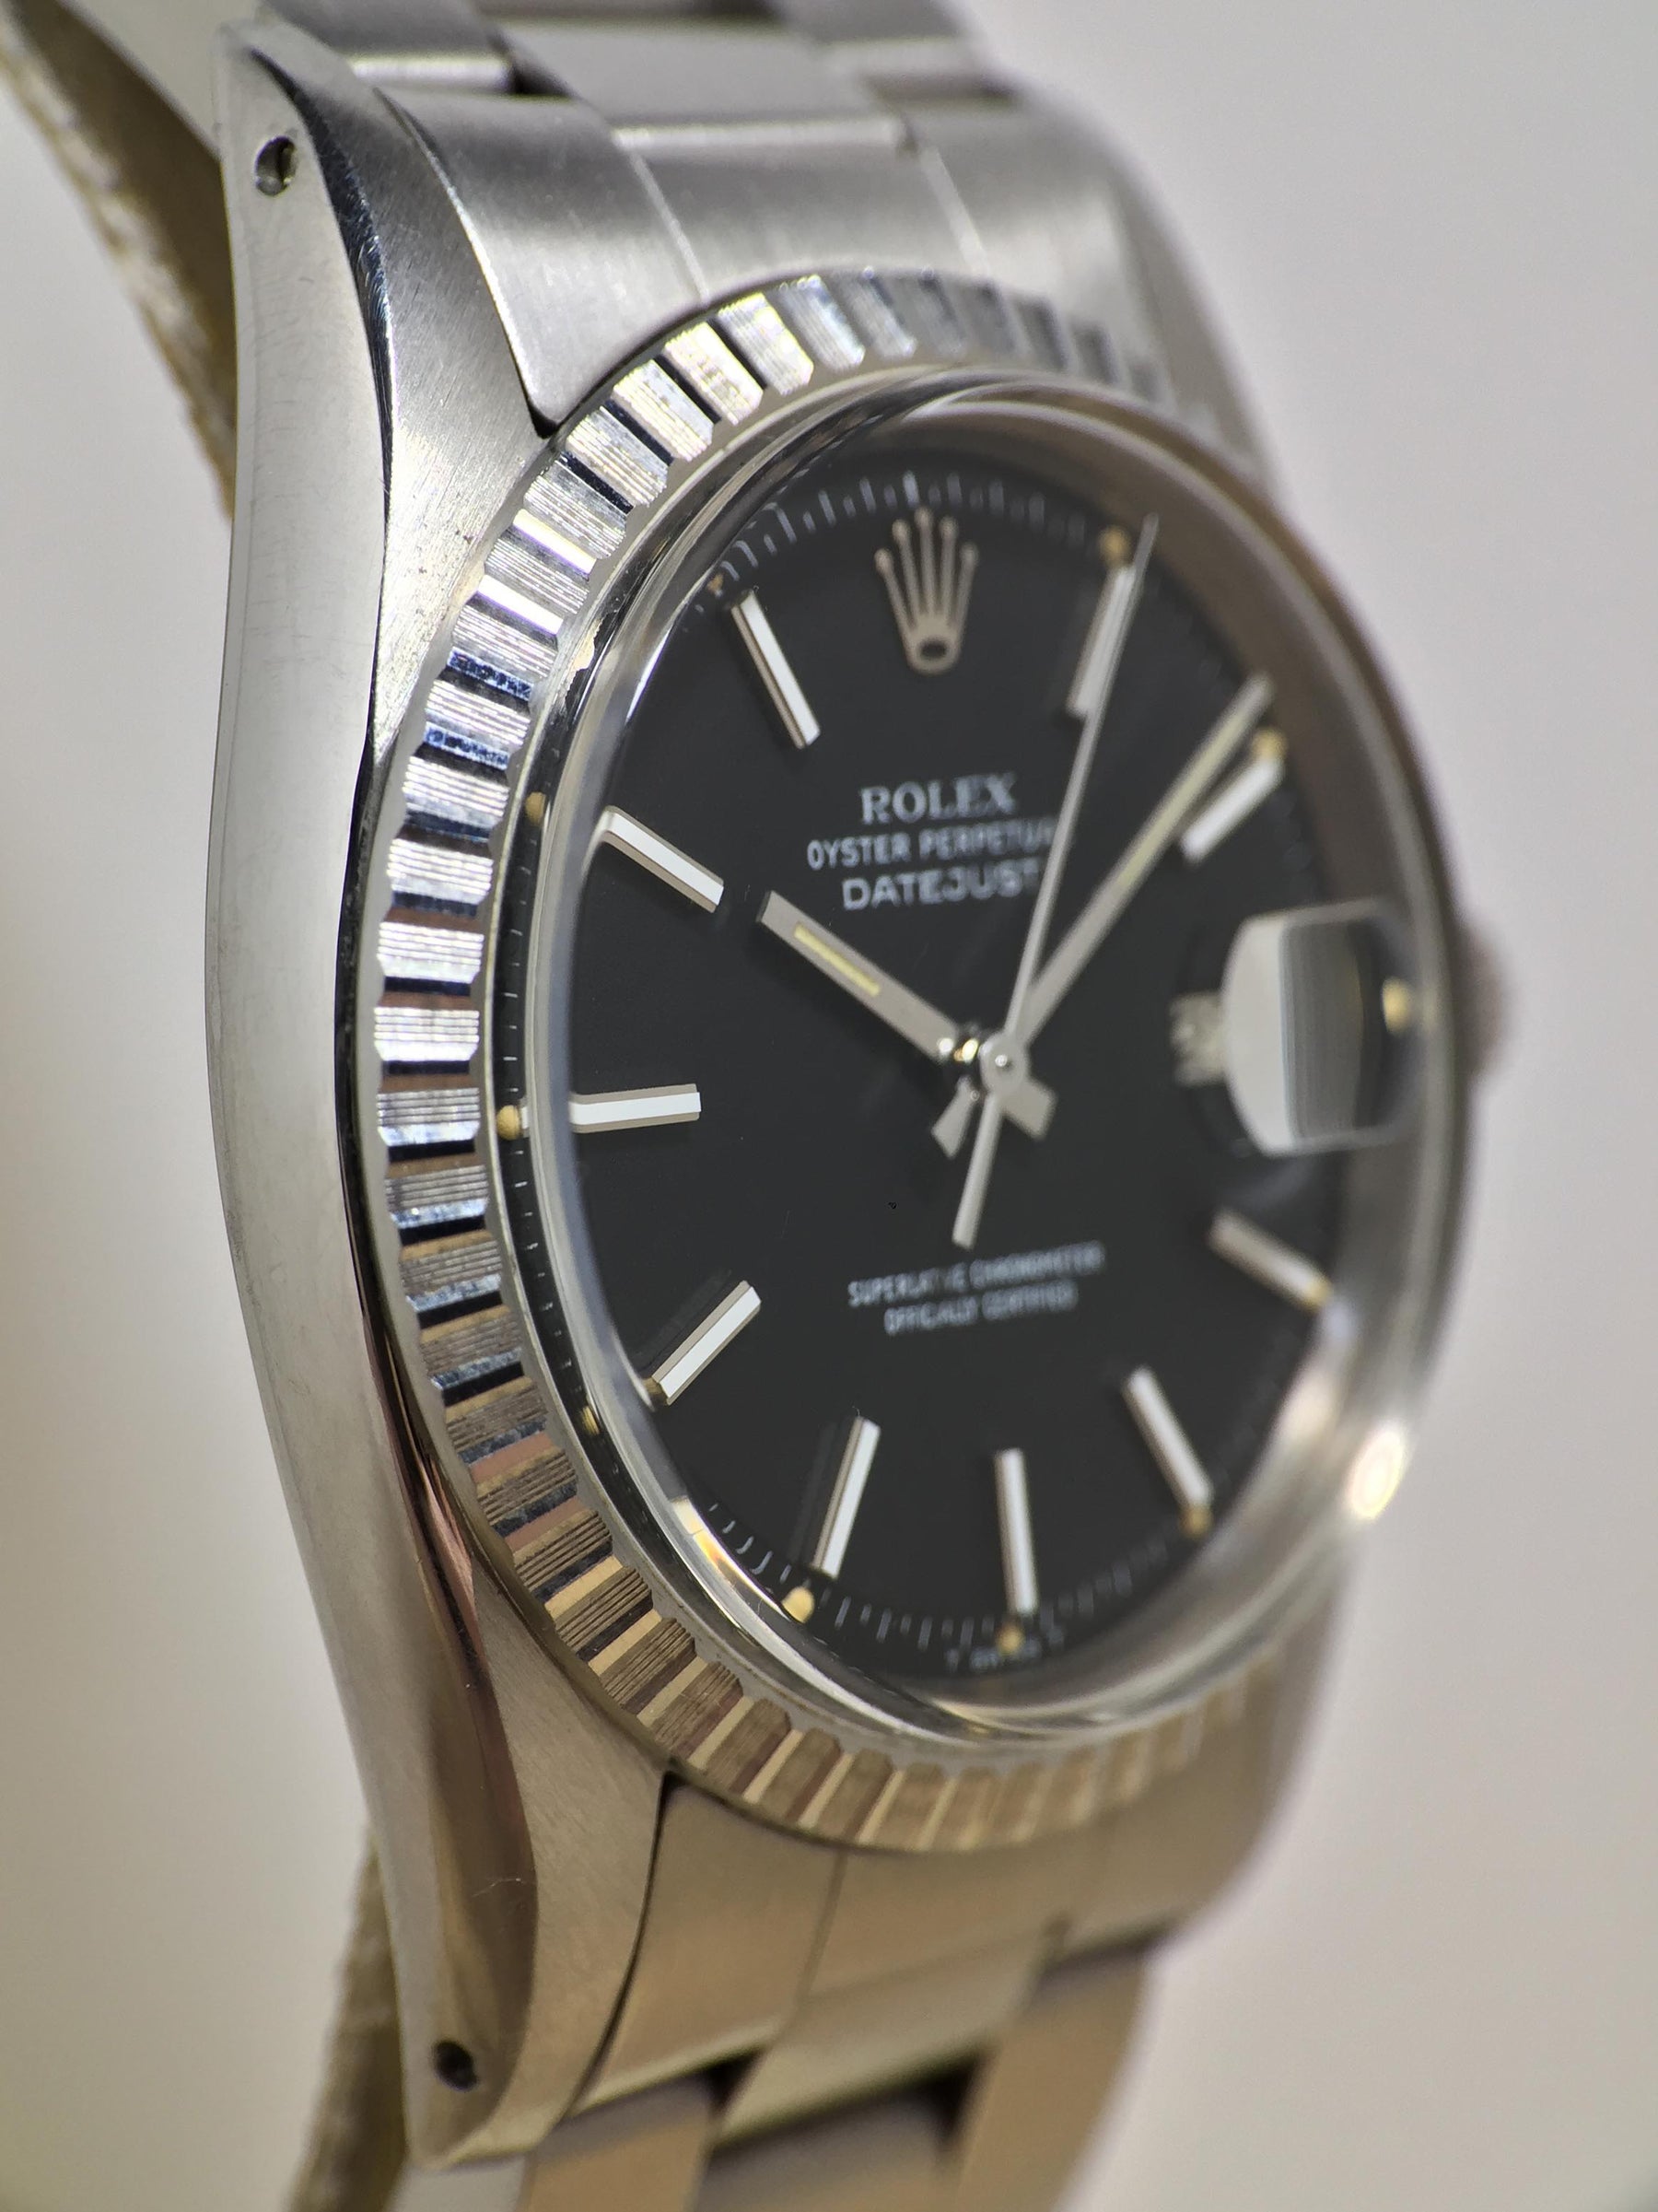 1977 Rolex Datejust 'Mint condition' Ref. 1603 (with Papers)